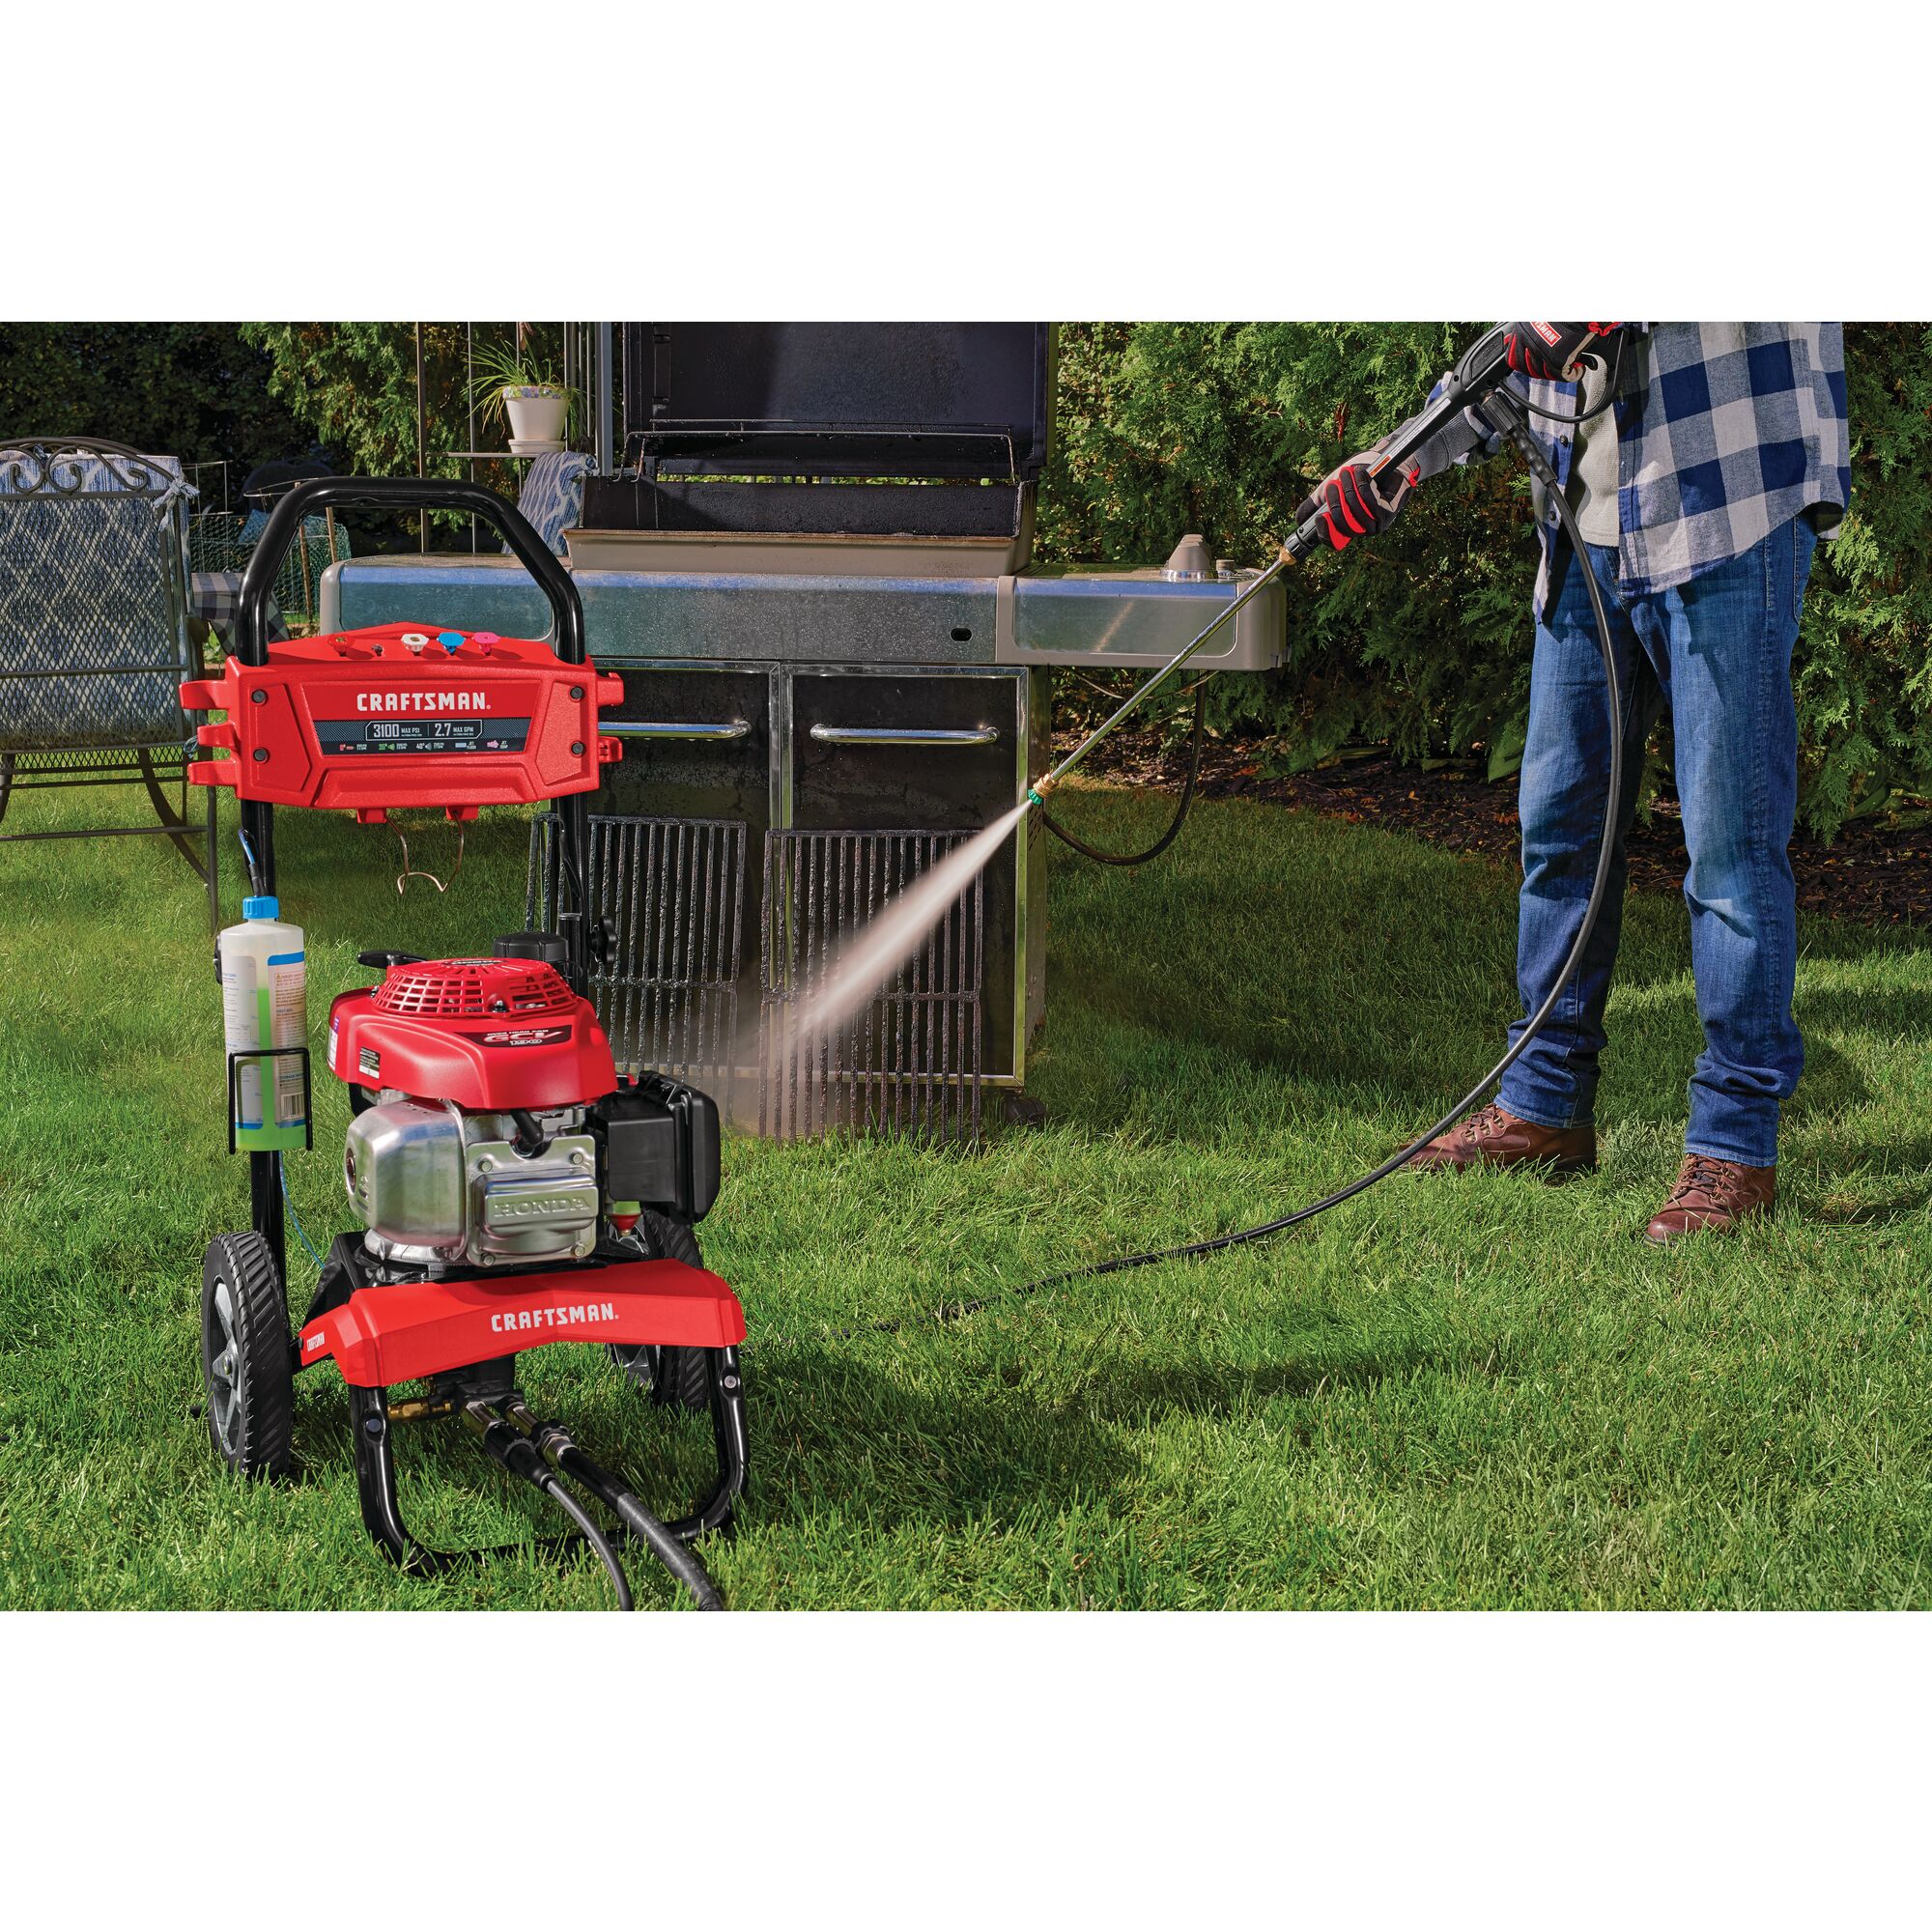 3100 MAX Pounds per Square Inch or 2 and seven tenths MAX Gallons Per Minute Pressure Washer being used by person to wash Bar B Que grills placed outdoors in lawn.